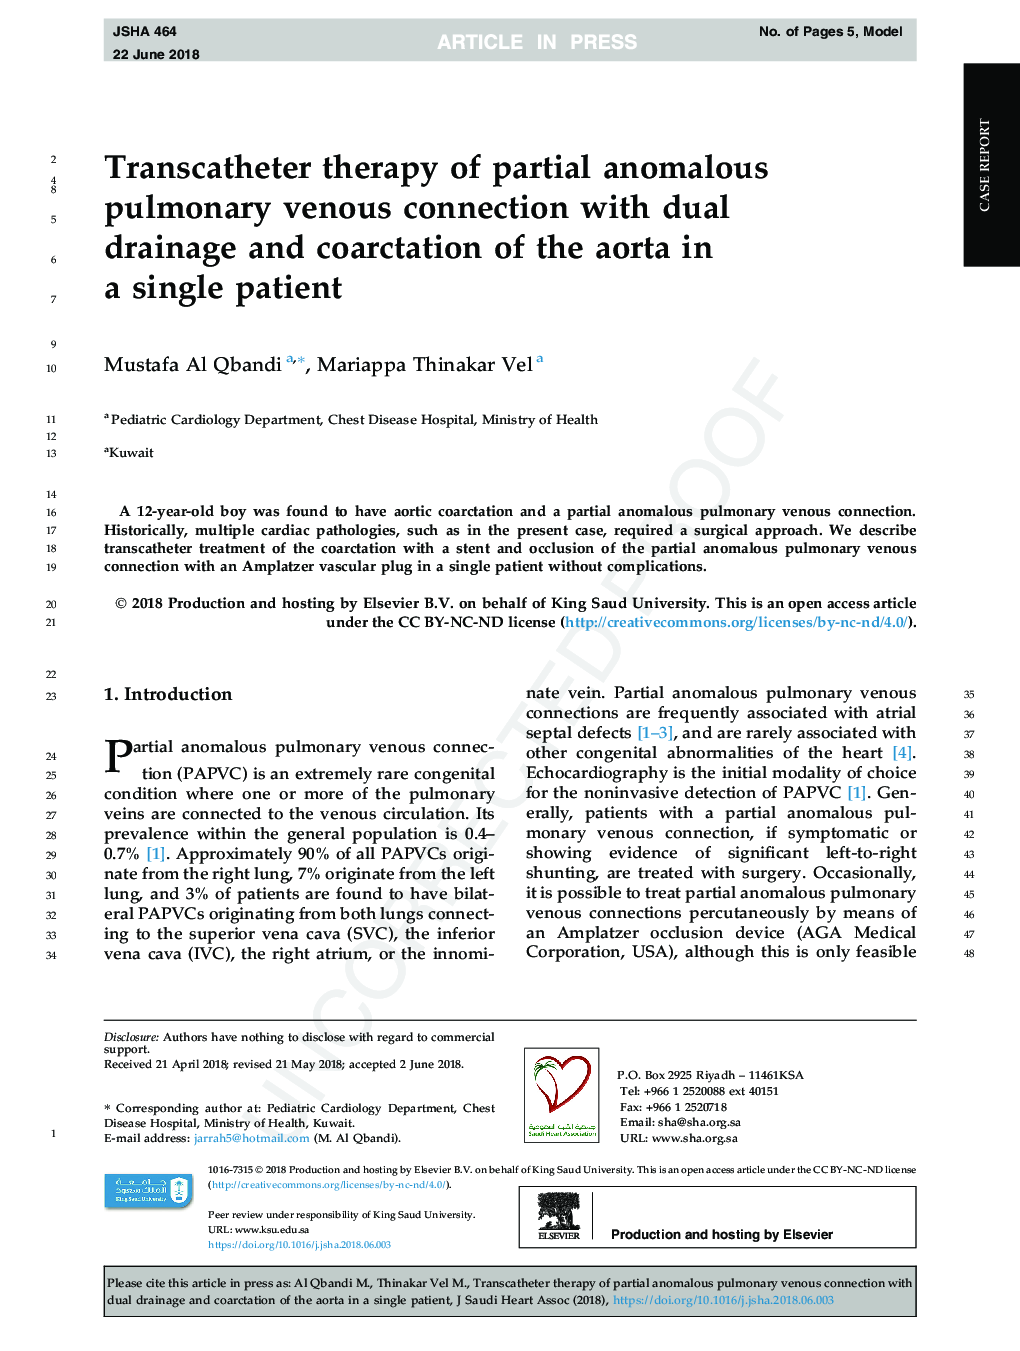 Transcatheter therapy of partial anomalous pulmonary venous connection with dual drainage and coarctation of the aorta in a single patient